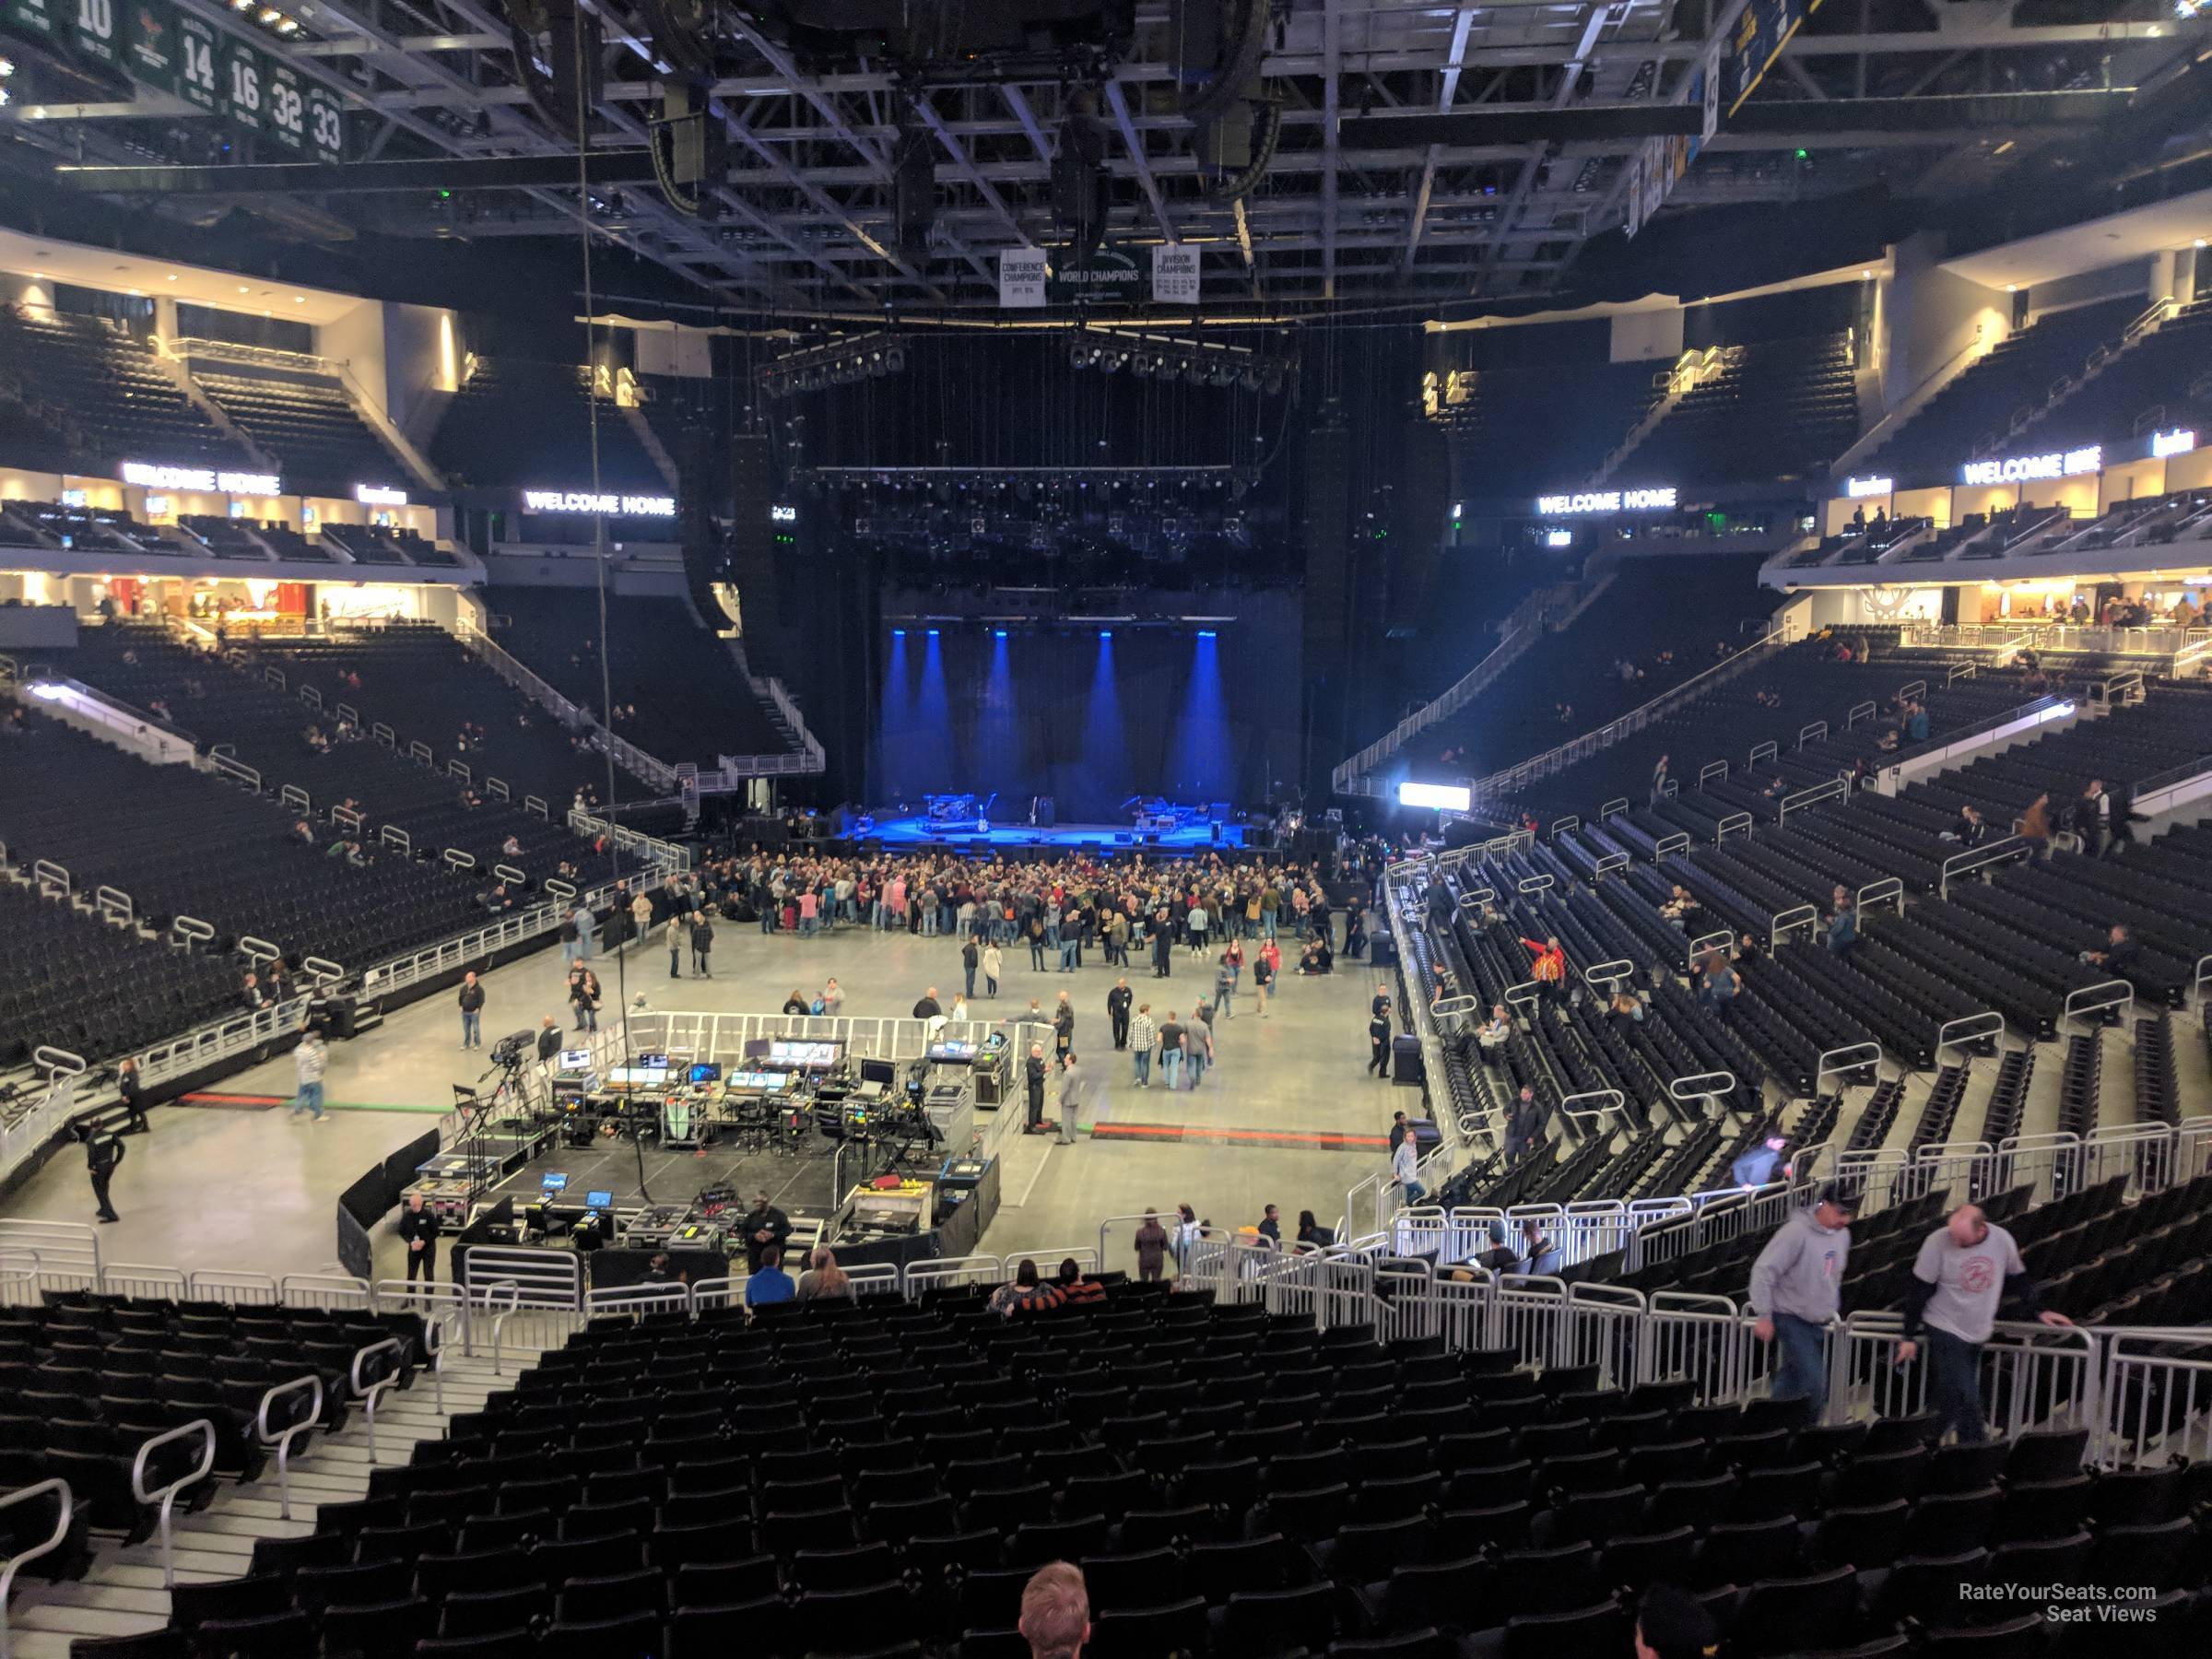 section 121, row 25 seat view  for concert - fiserv forum